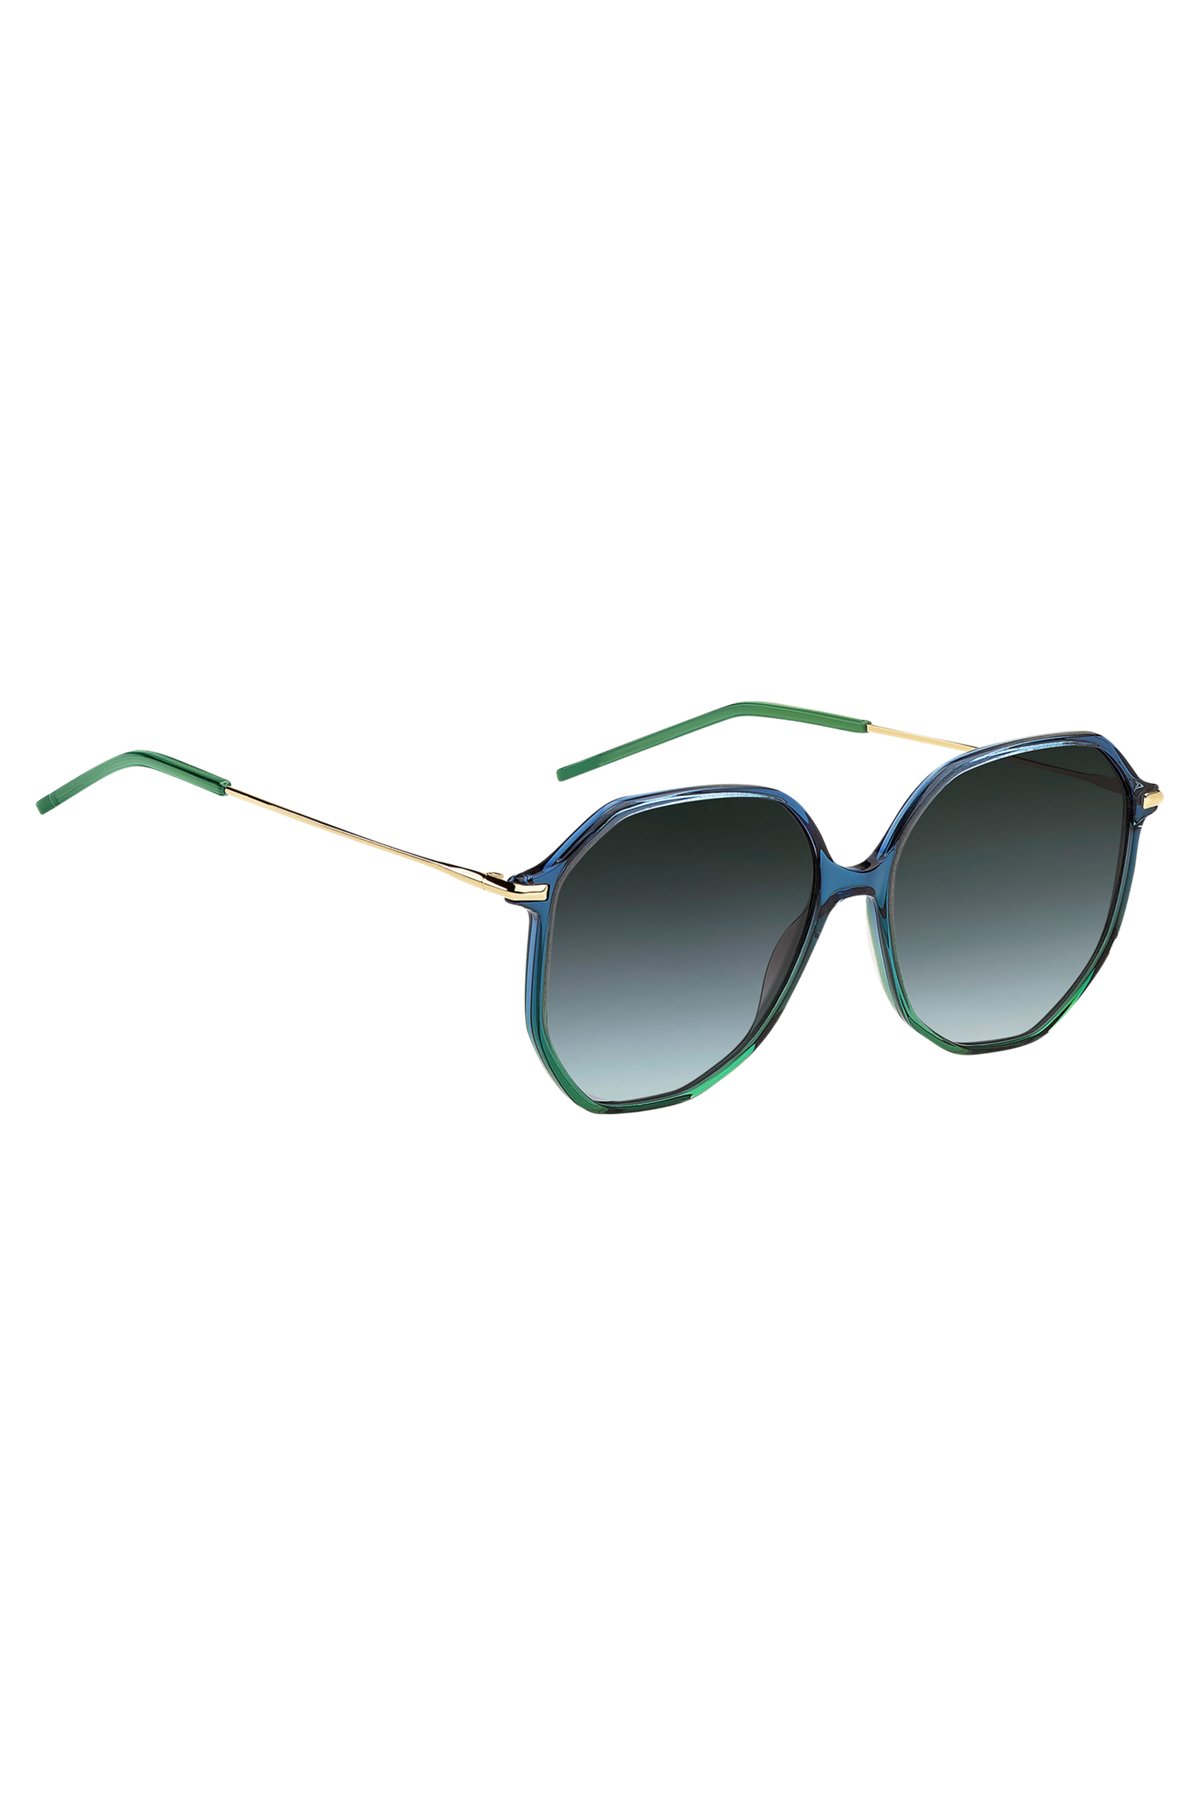 Tubular-temple sunglasses with blue-green frames, Blue Patterned